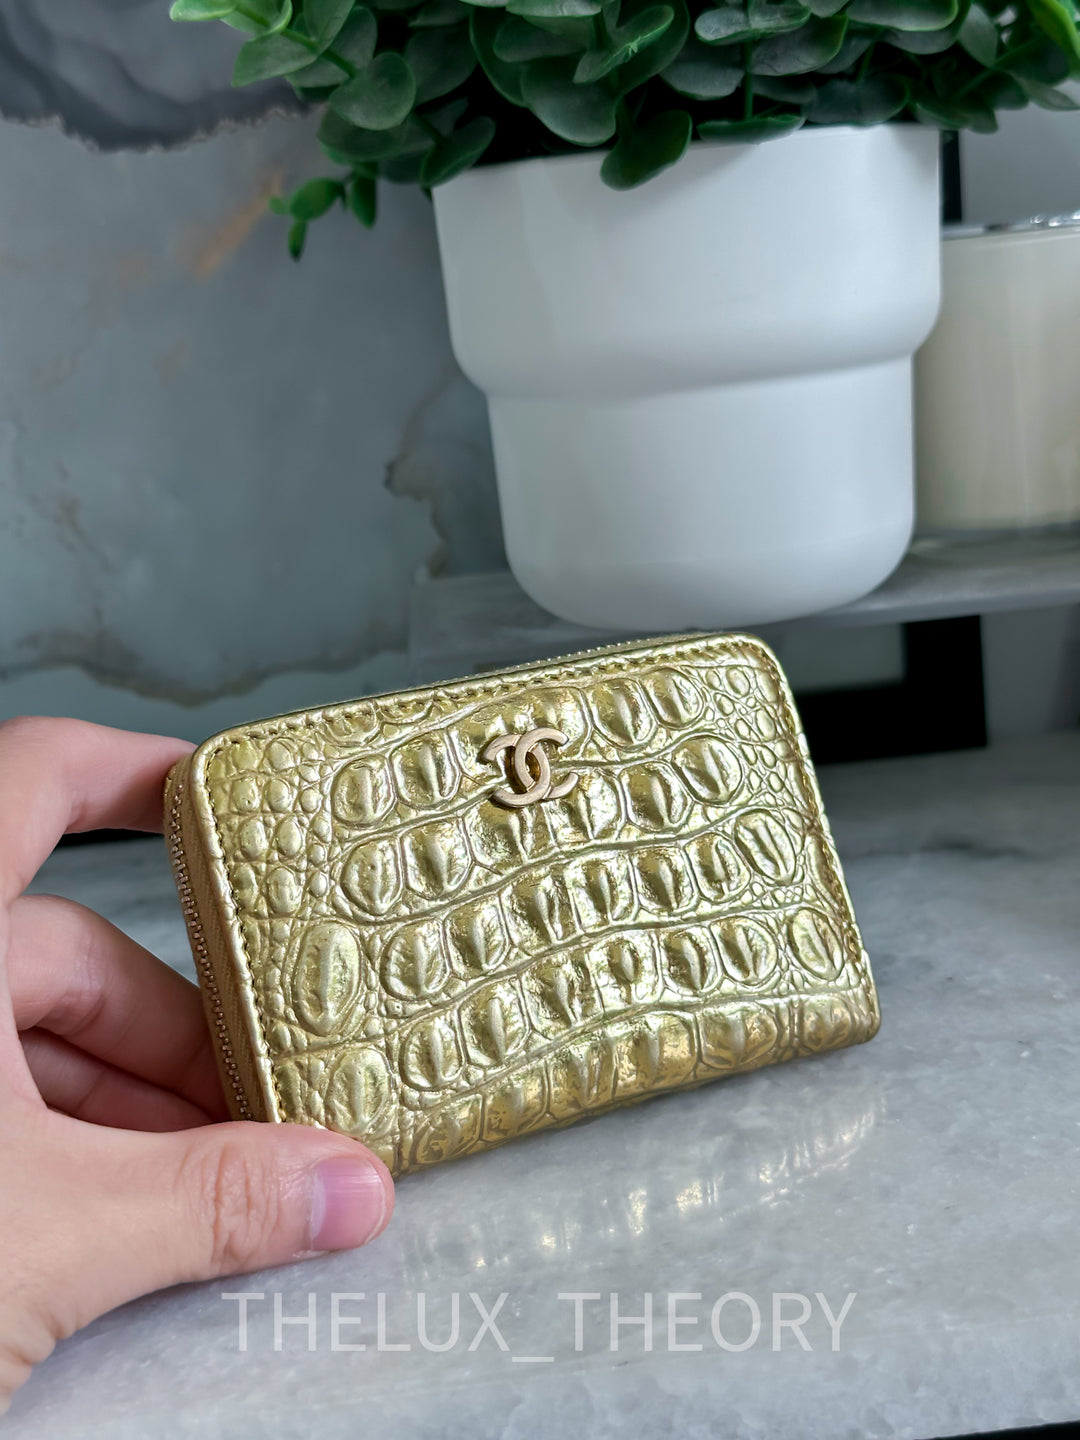 19A GOLD CROCO EMBOSSED ZIPPED COIN PURSE